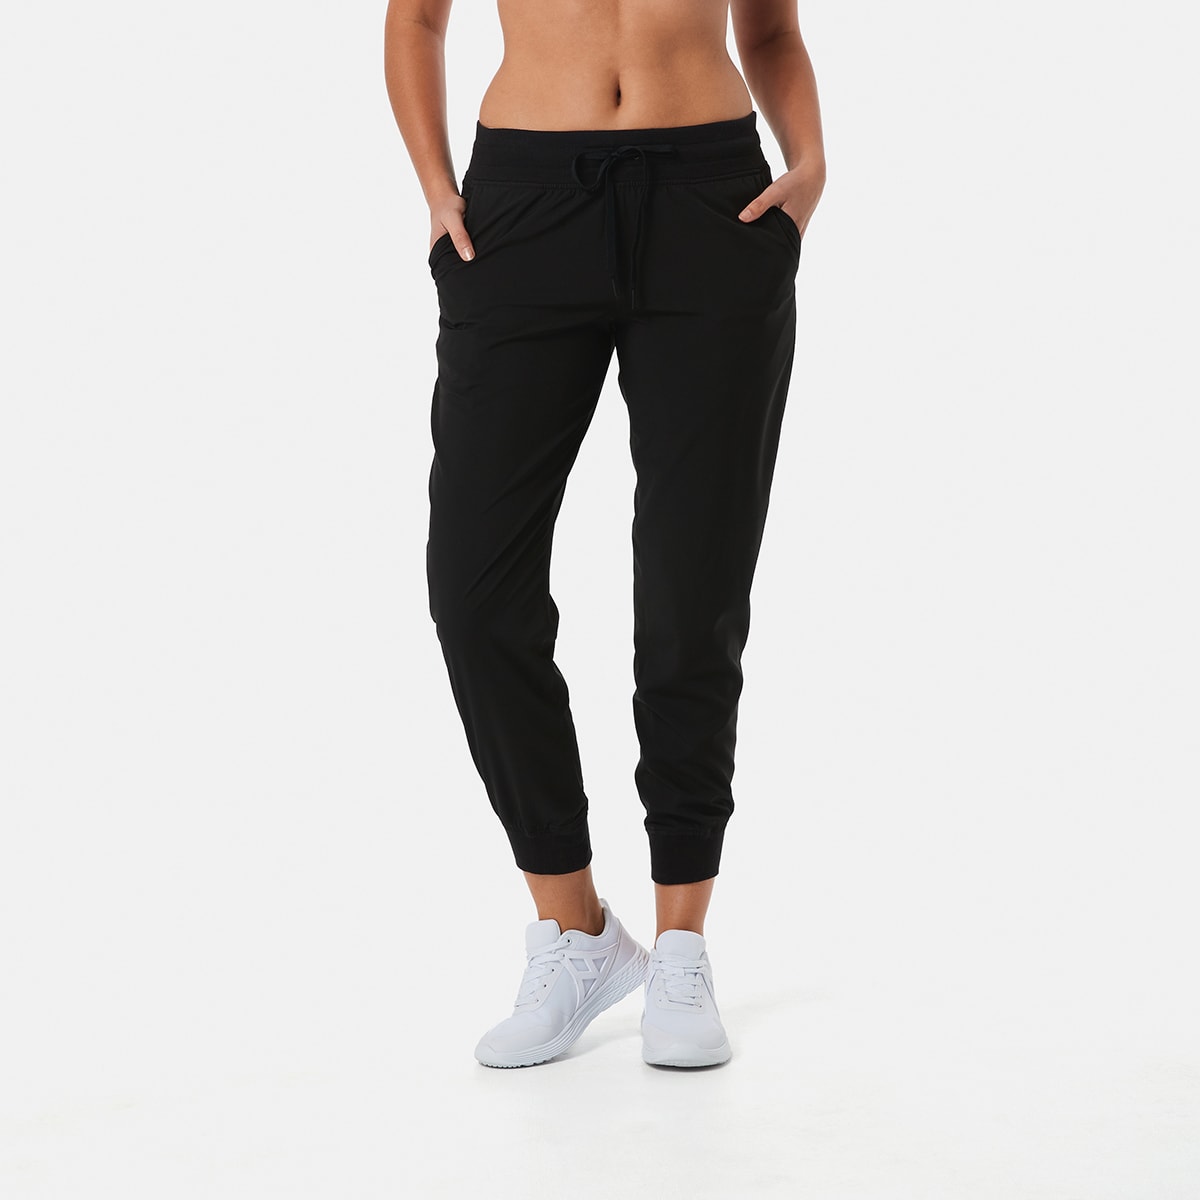 Kissero Dry Fit Solid Women's Solid Black with White Stripe Track Pant | Women's Polyster Track Pants,Joggers, Gym, Active WearLower, Yoga :  Amazon.in: Clothing & Accessories